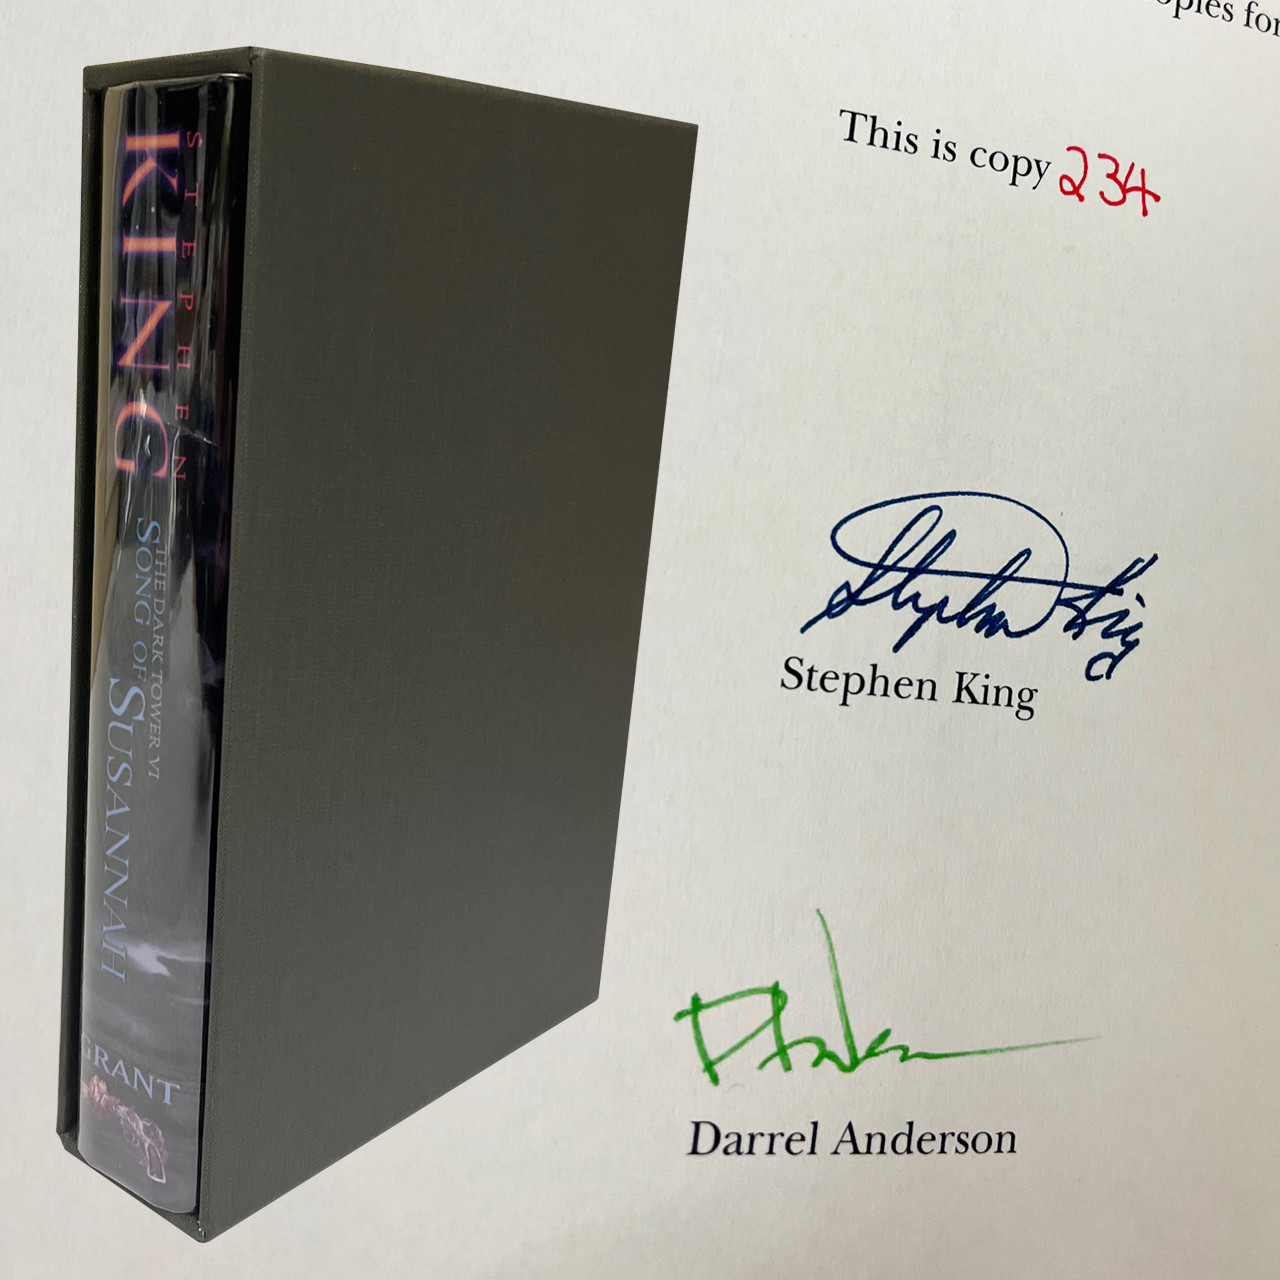 Stephen King "The Dark Tower" Volumes III-VII, "The Little Sisters Of Eluria", "The Wind Through The Keyhole", Signed Limited Edition No. 234, Matching Numbers Set, 9 Books In 12 Volumes